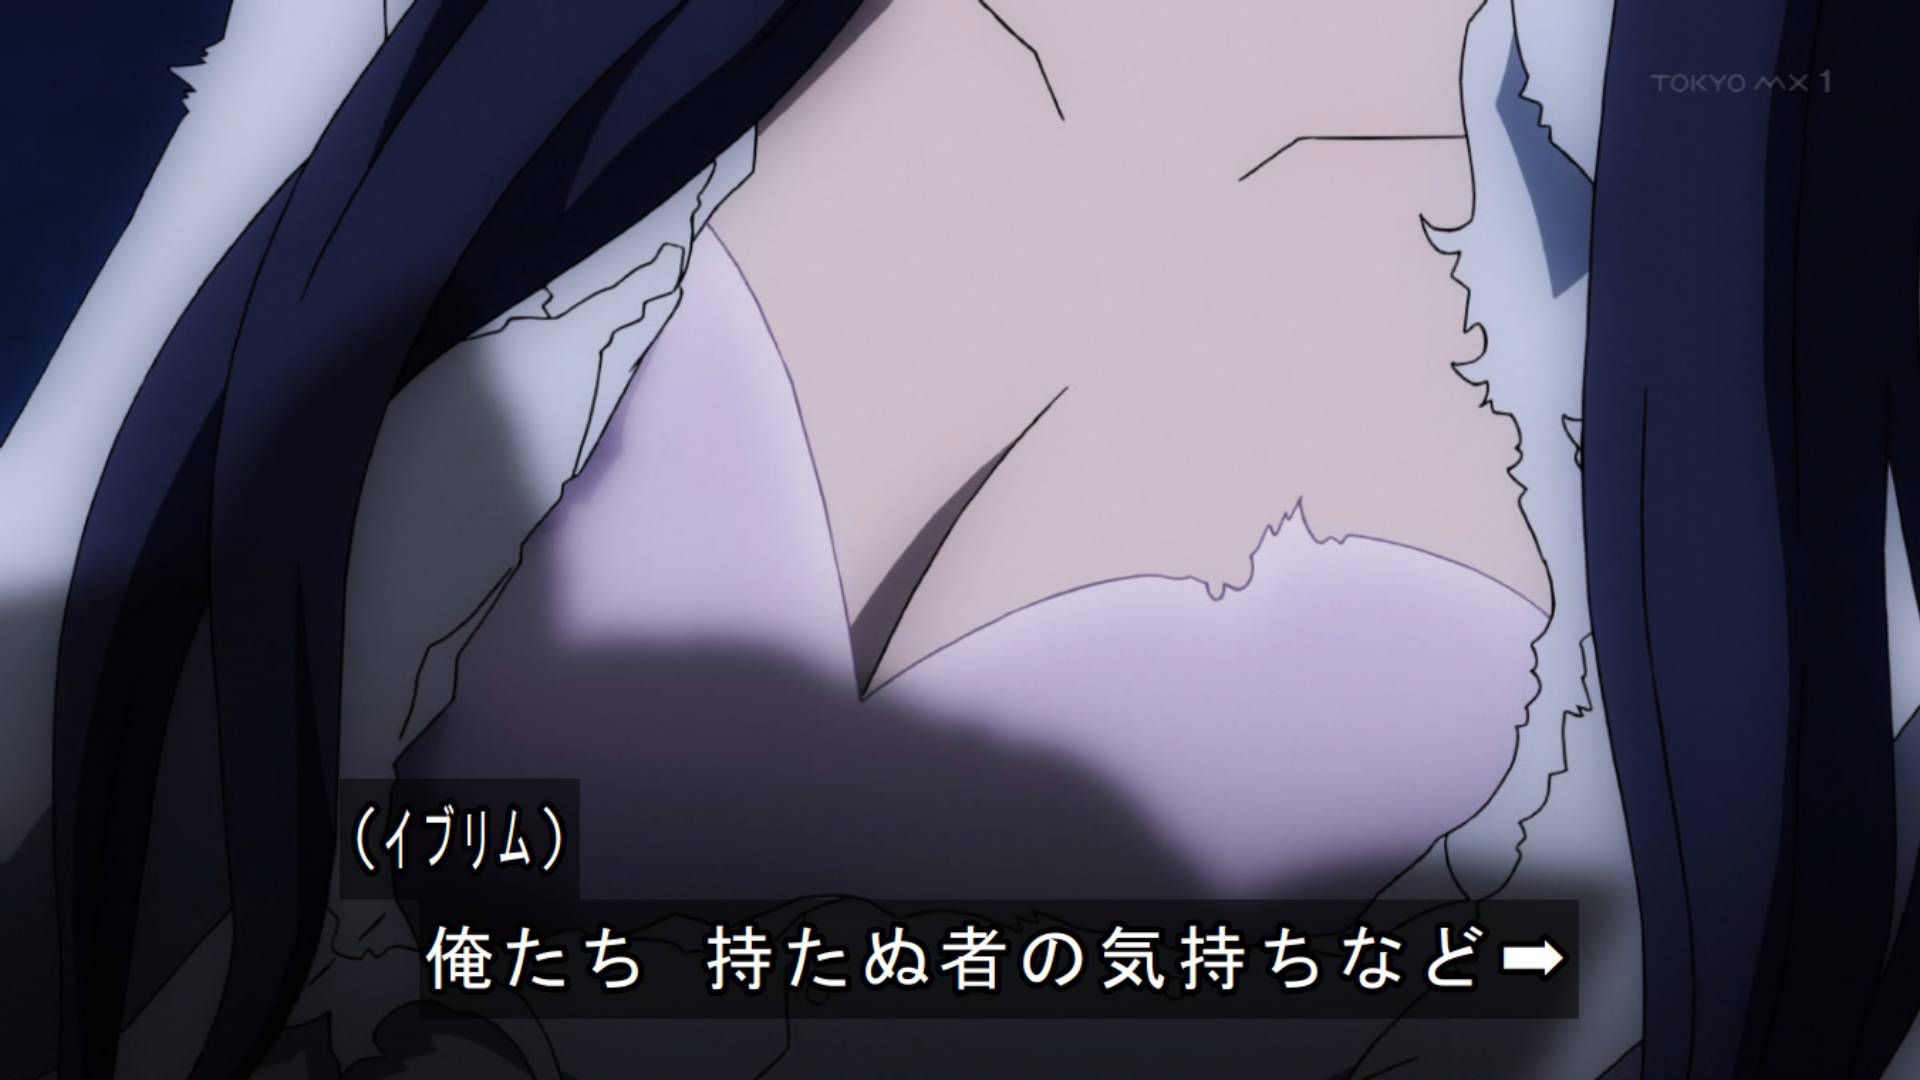 The latest episode of this season's anime "Megaton Class Musashi" is too etched wwwwwww 2